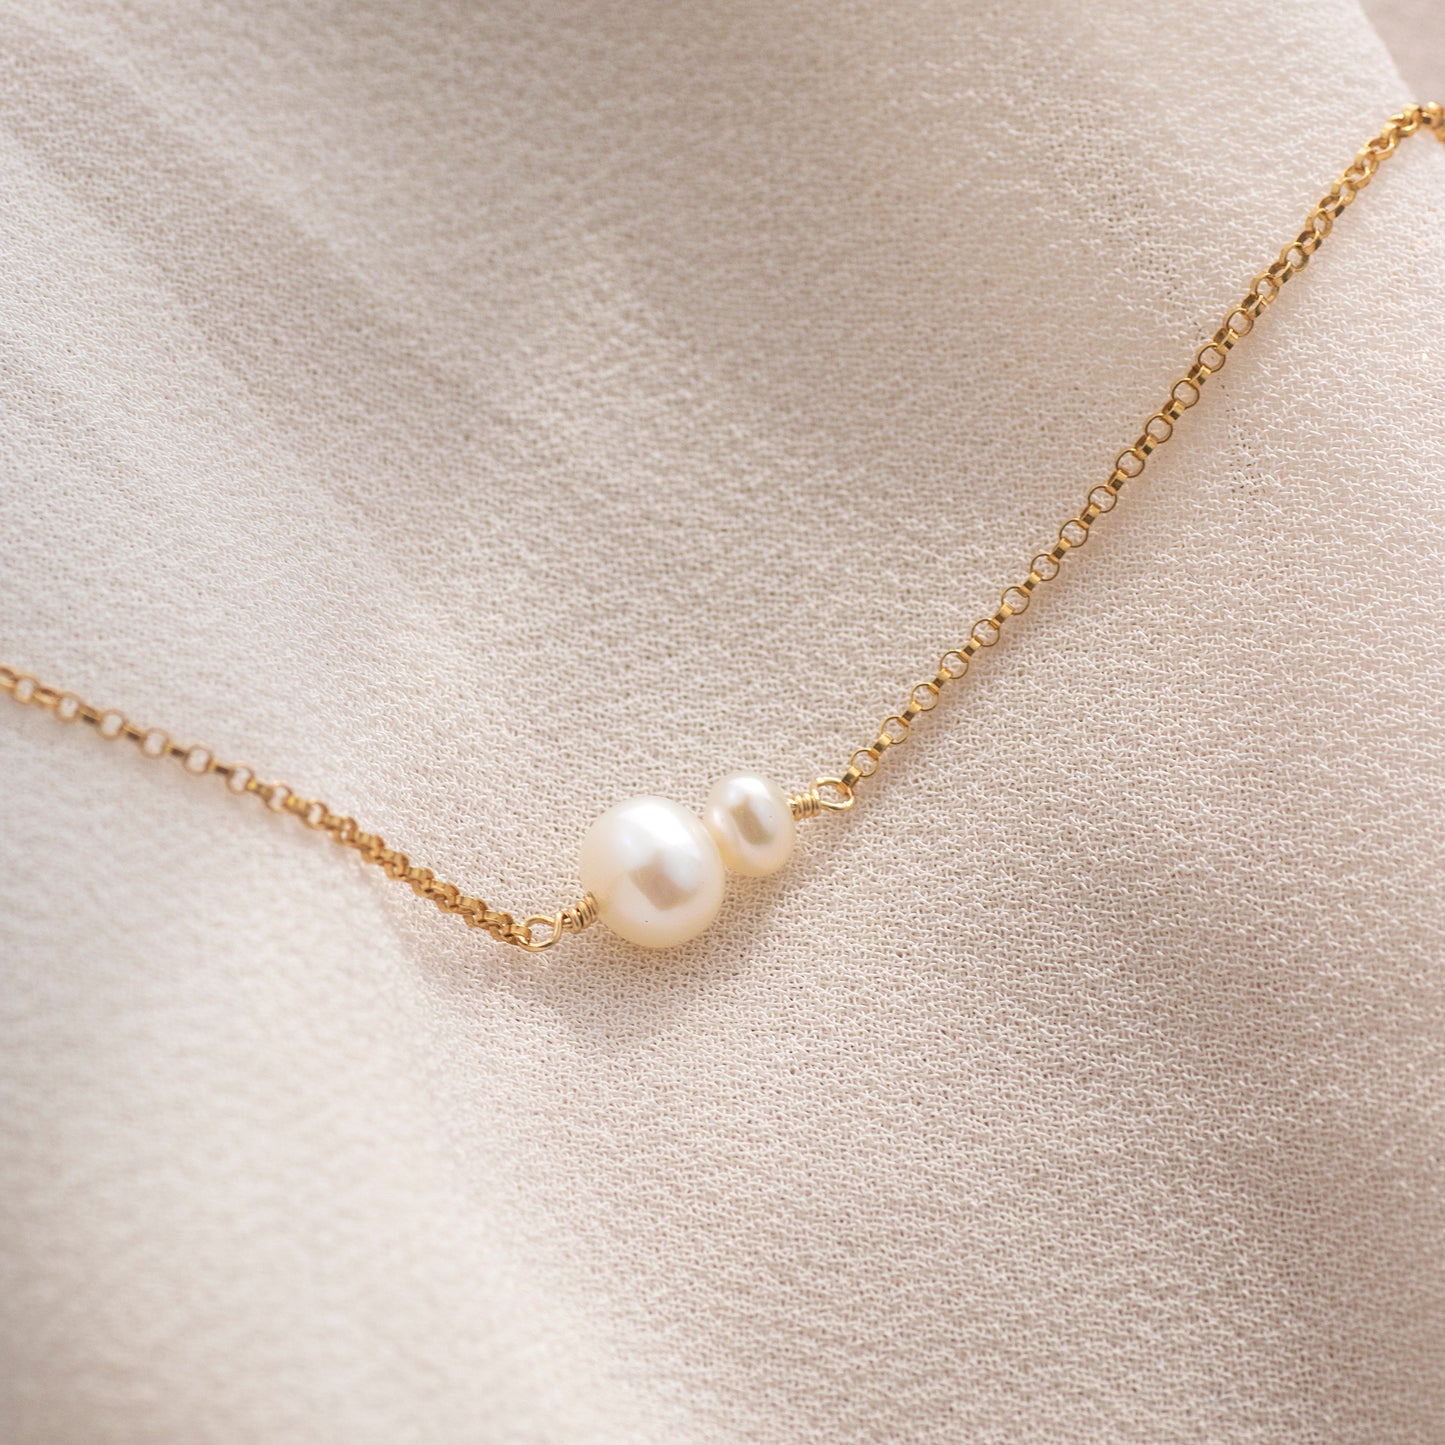 Gift for Friend - Double Pearl Bracelet - Two pearls for Two Friends